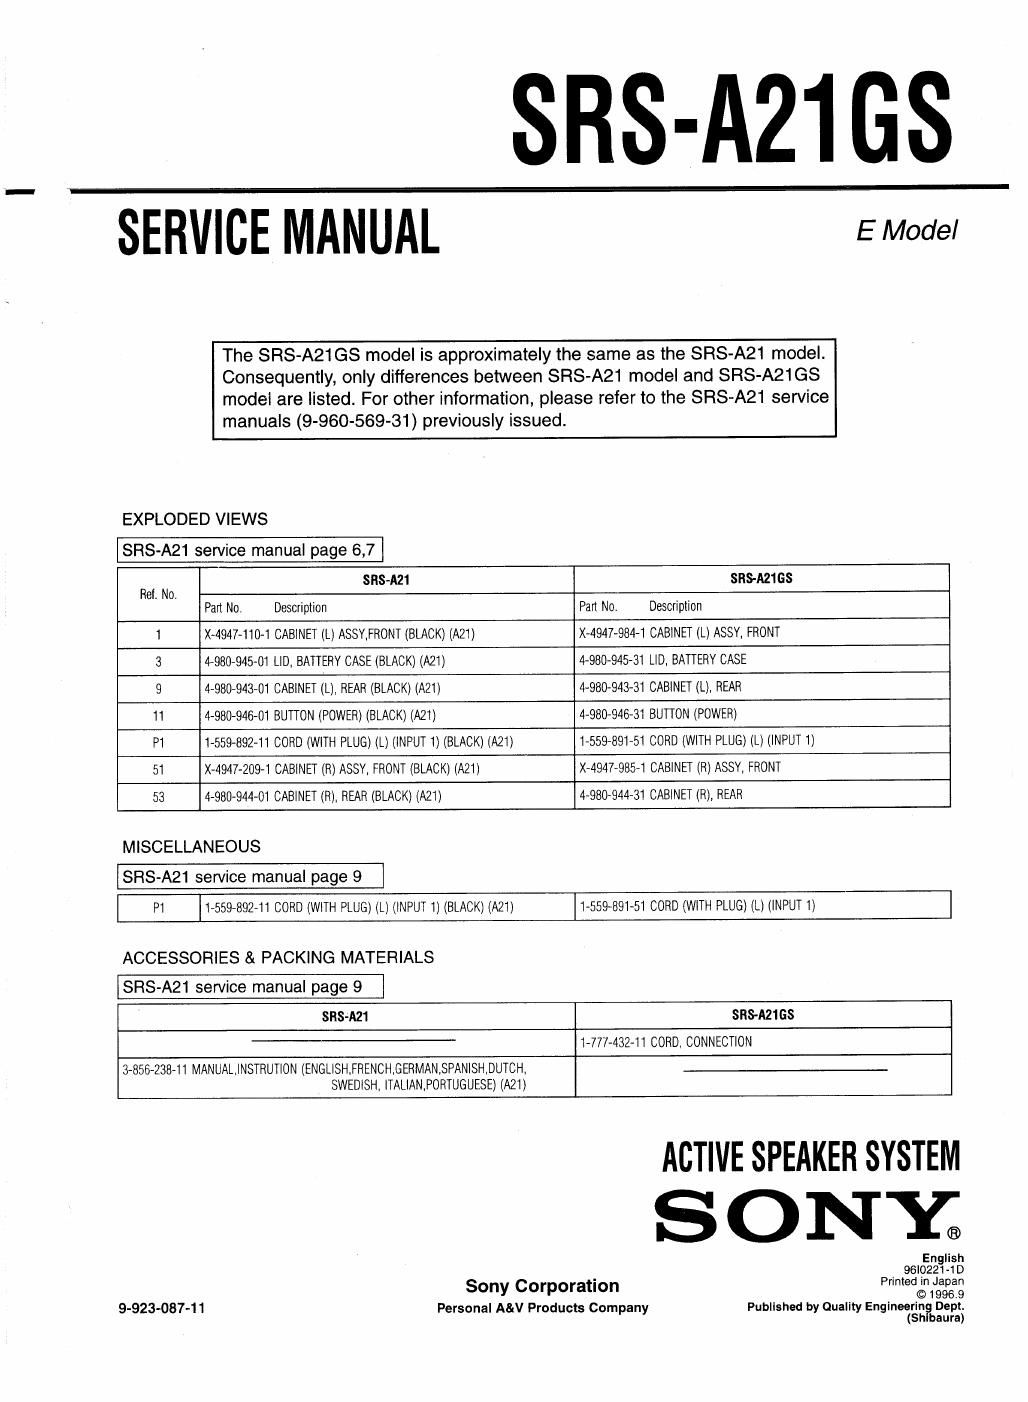 sony srs a 21 gs service manual